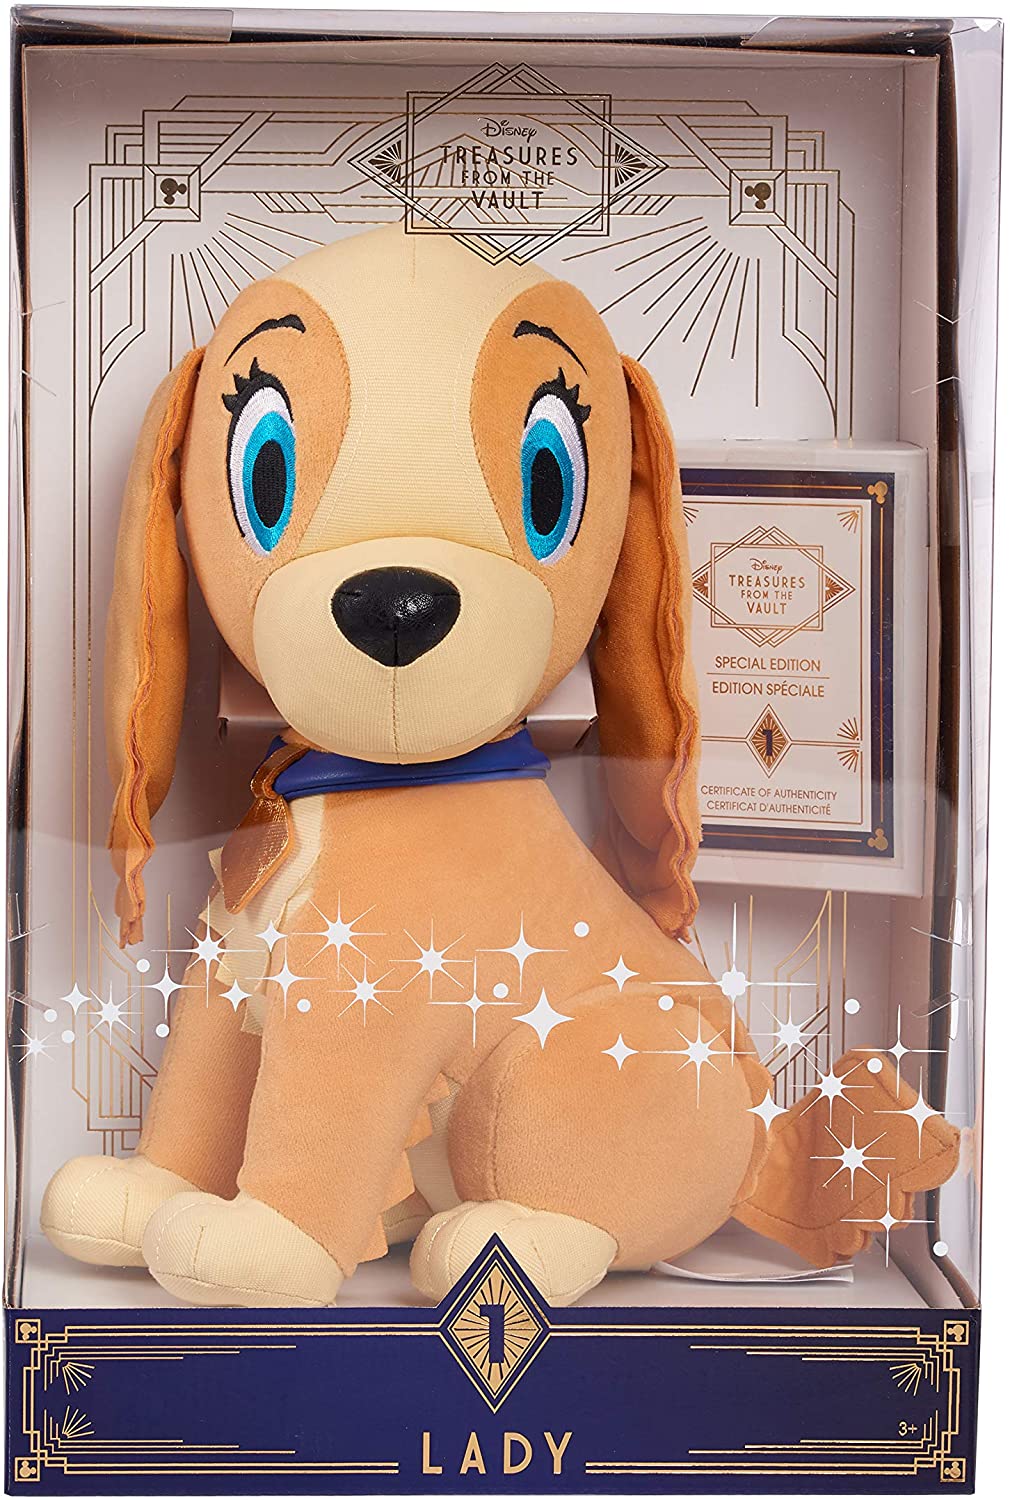 Limited Edition Lady plush first from the Treasures From